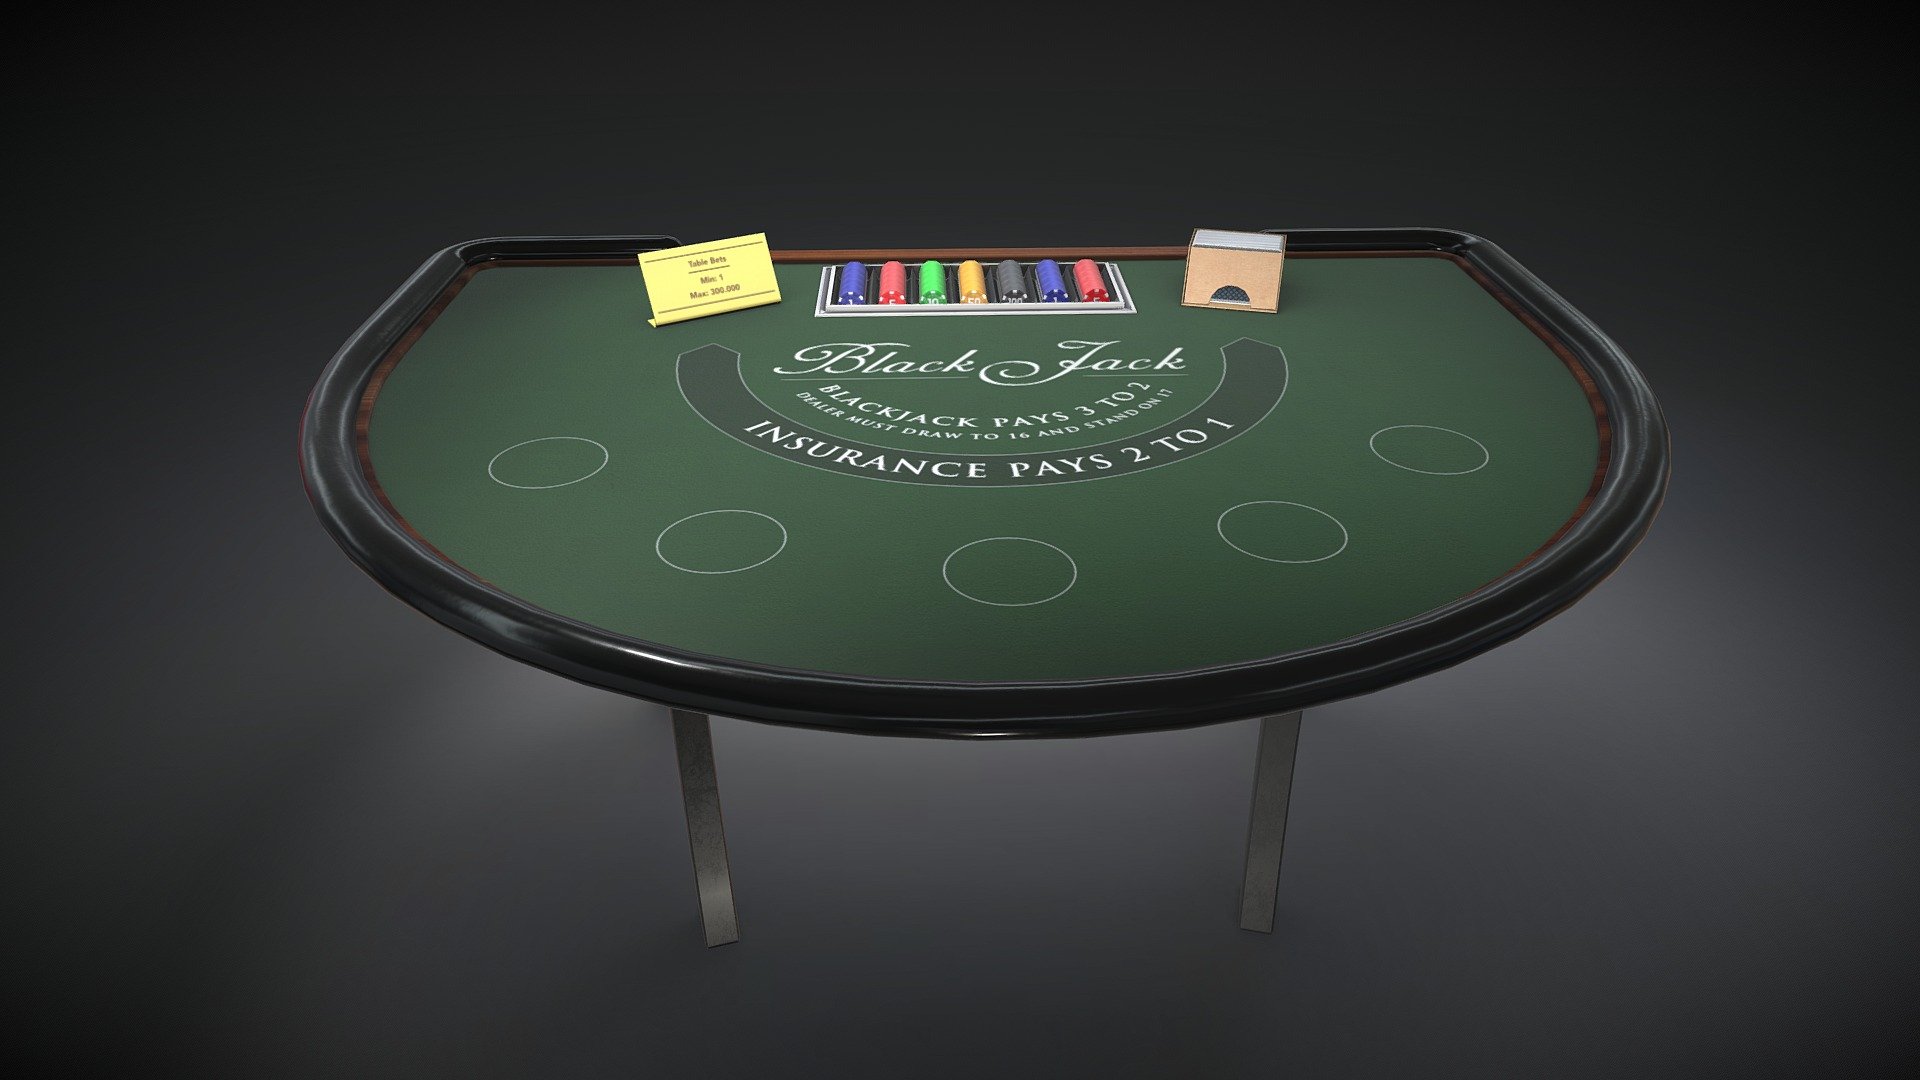 Casino Black Jack table
optimized for mobile. 2 2k texture maps and one for the floor (baked shadow) 3d model